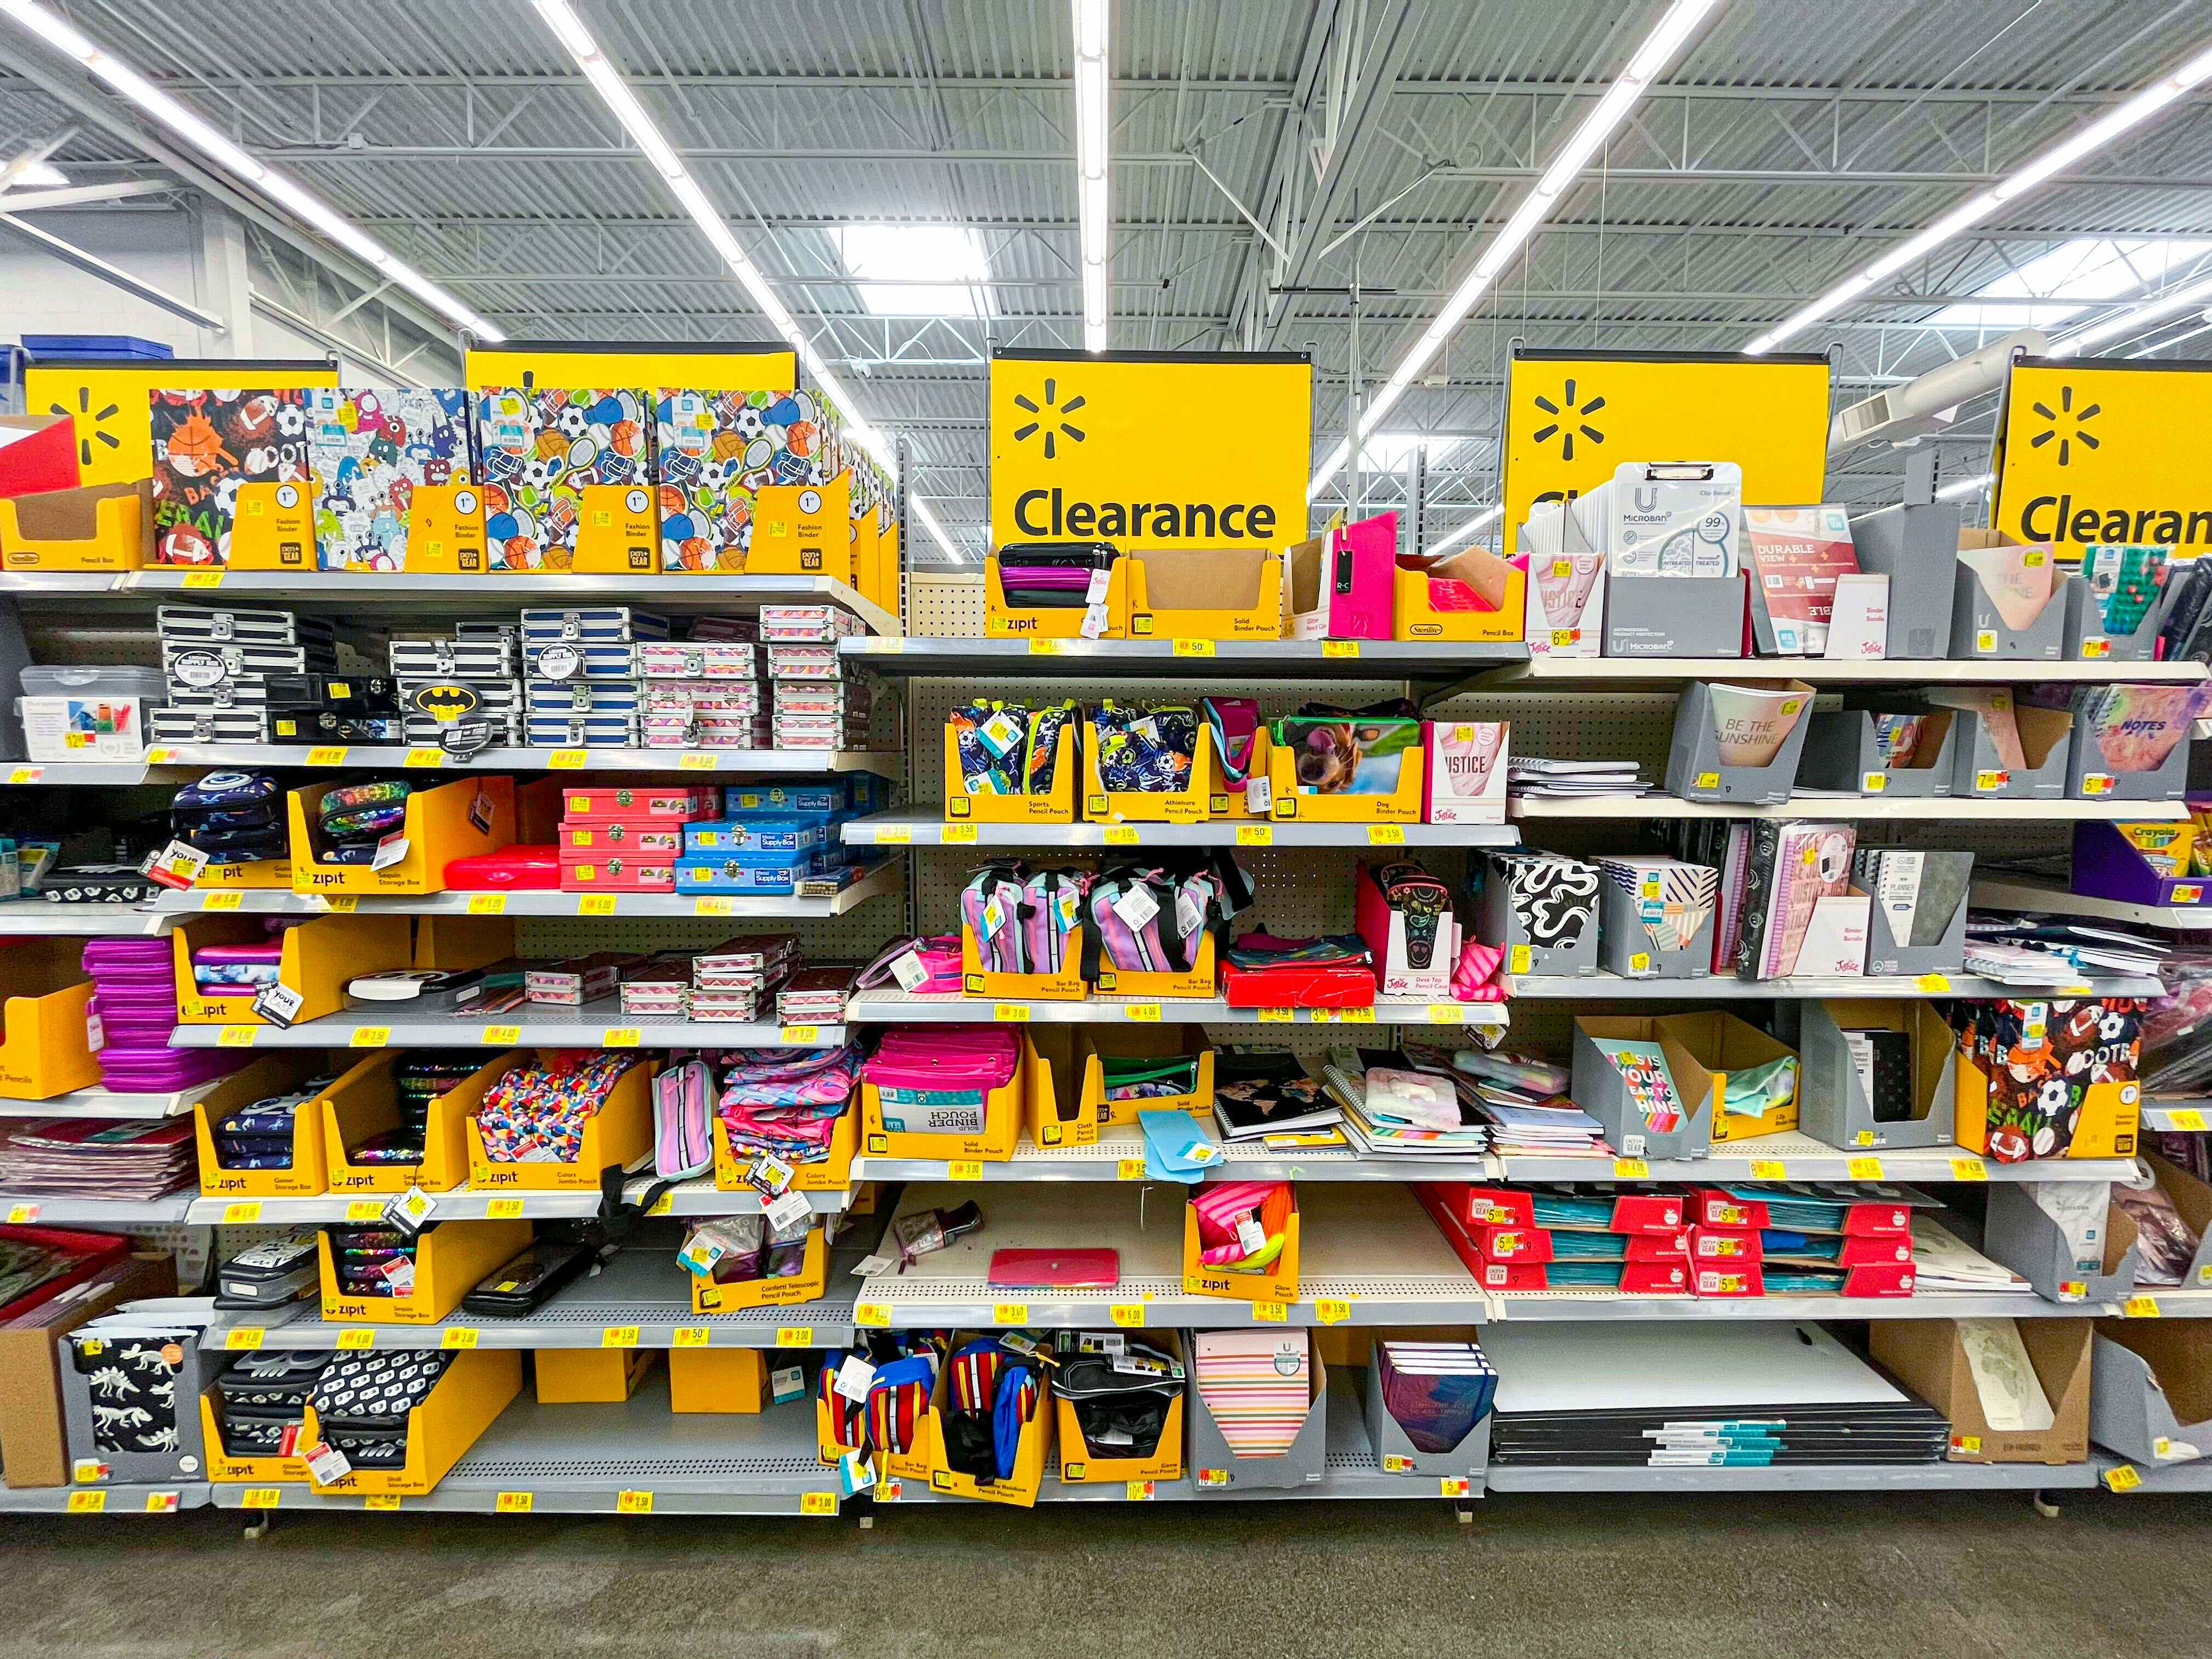 A walmart back-to-school clearance shelf filled with school supplies in store